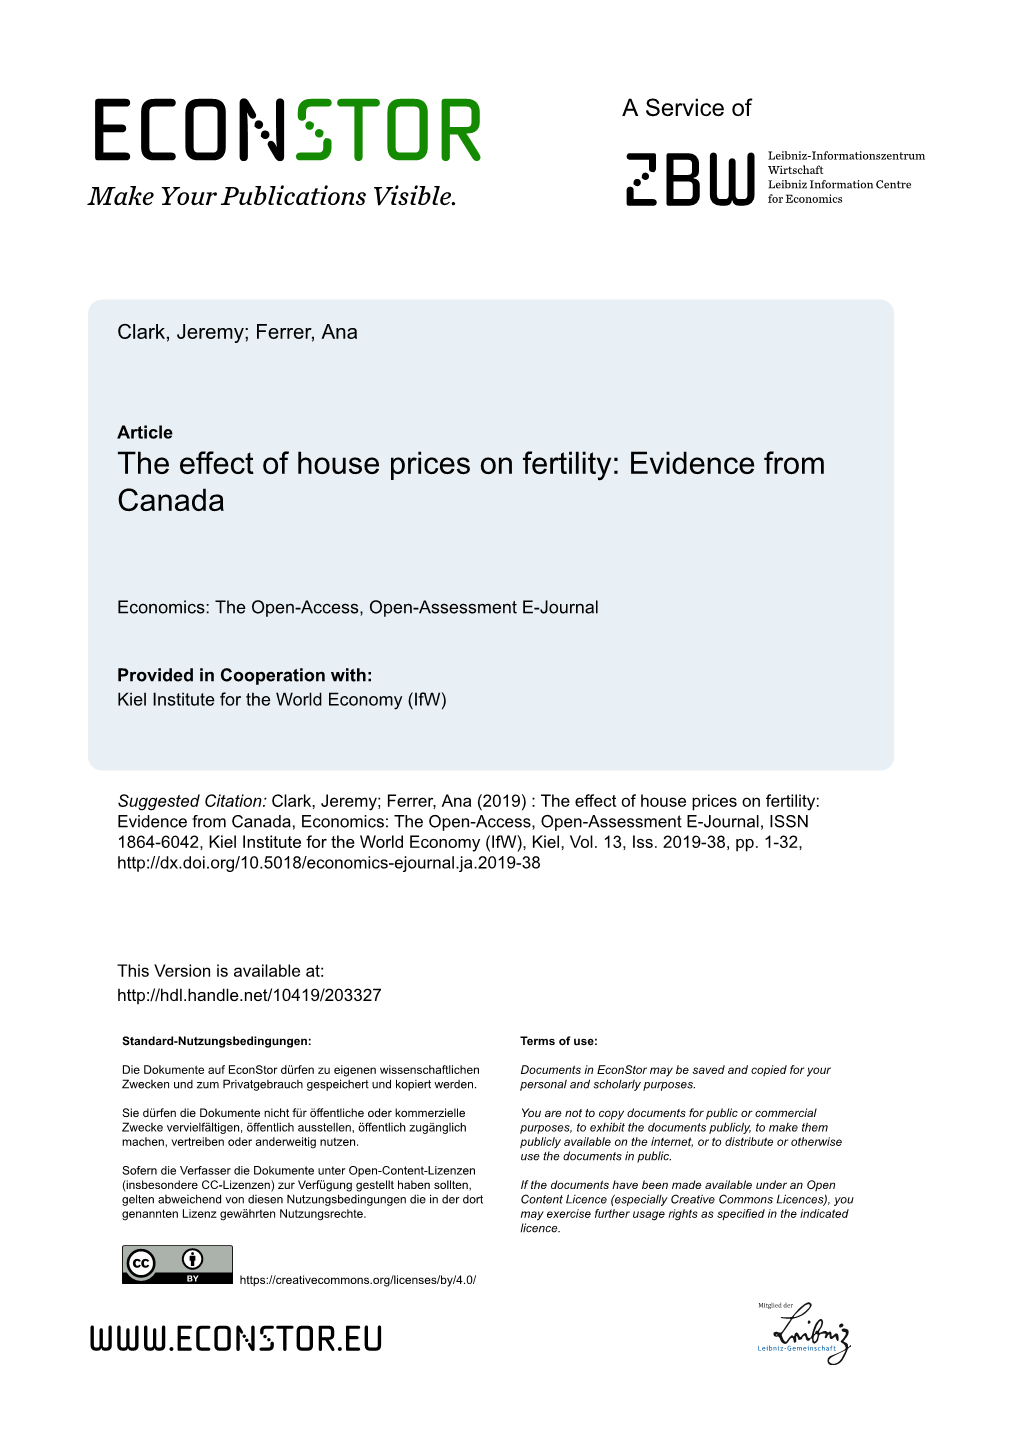 The Effect of House Prices on Fertility: Evidence from Canada